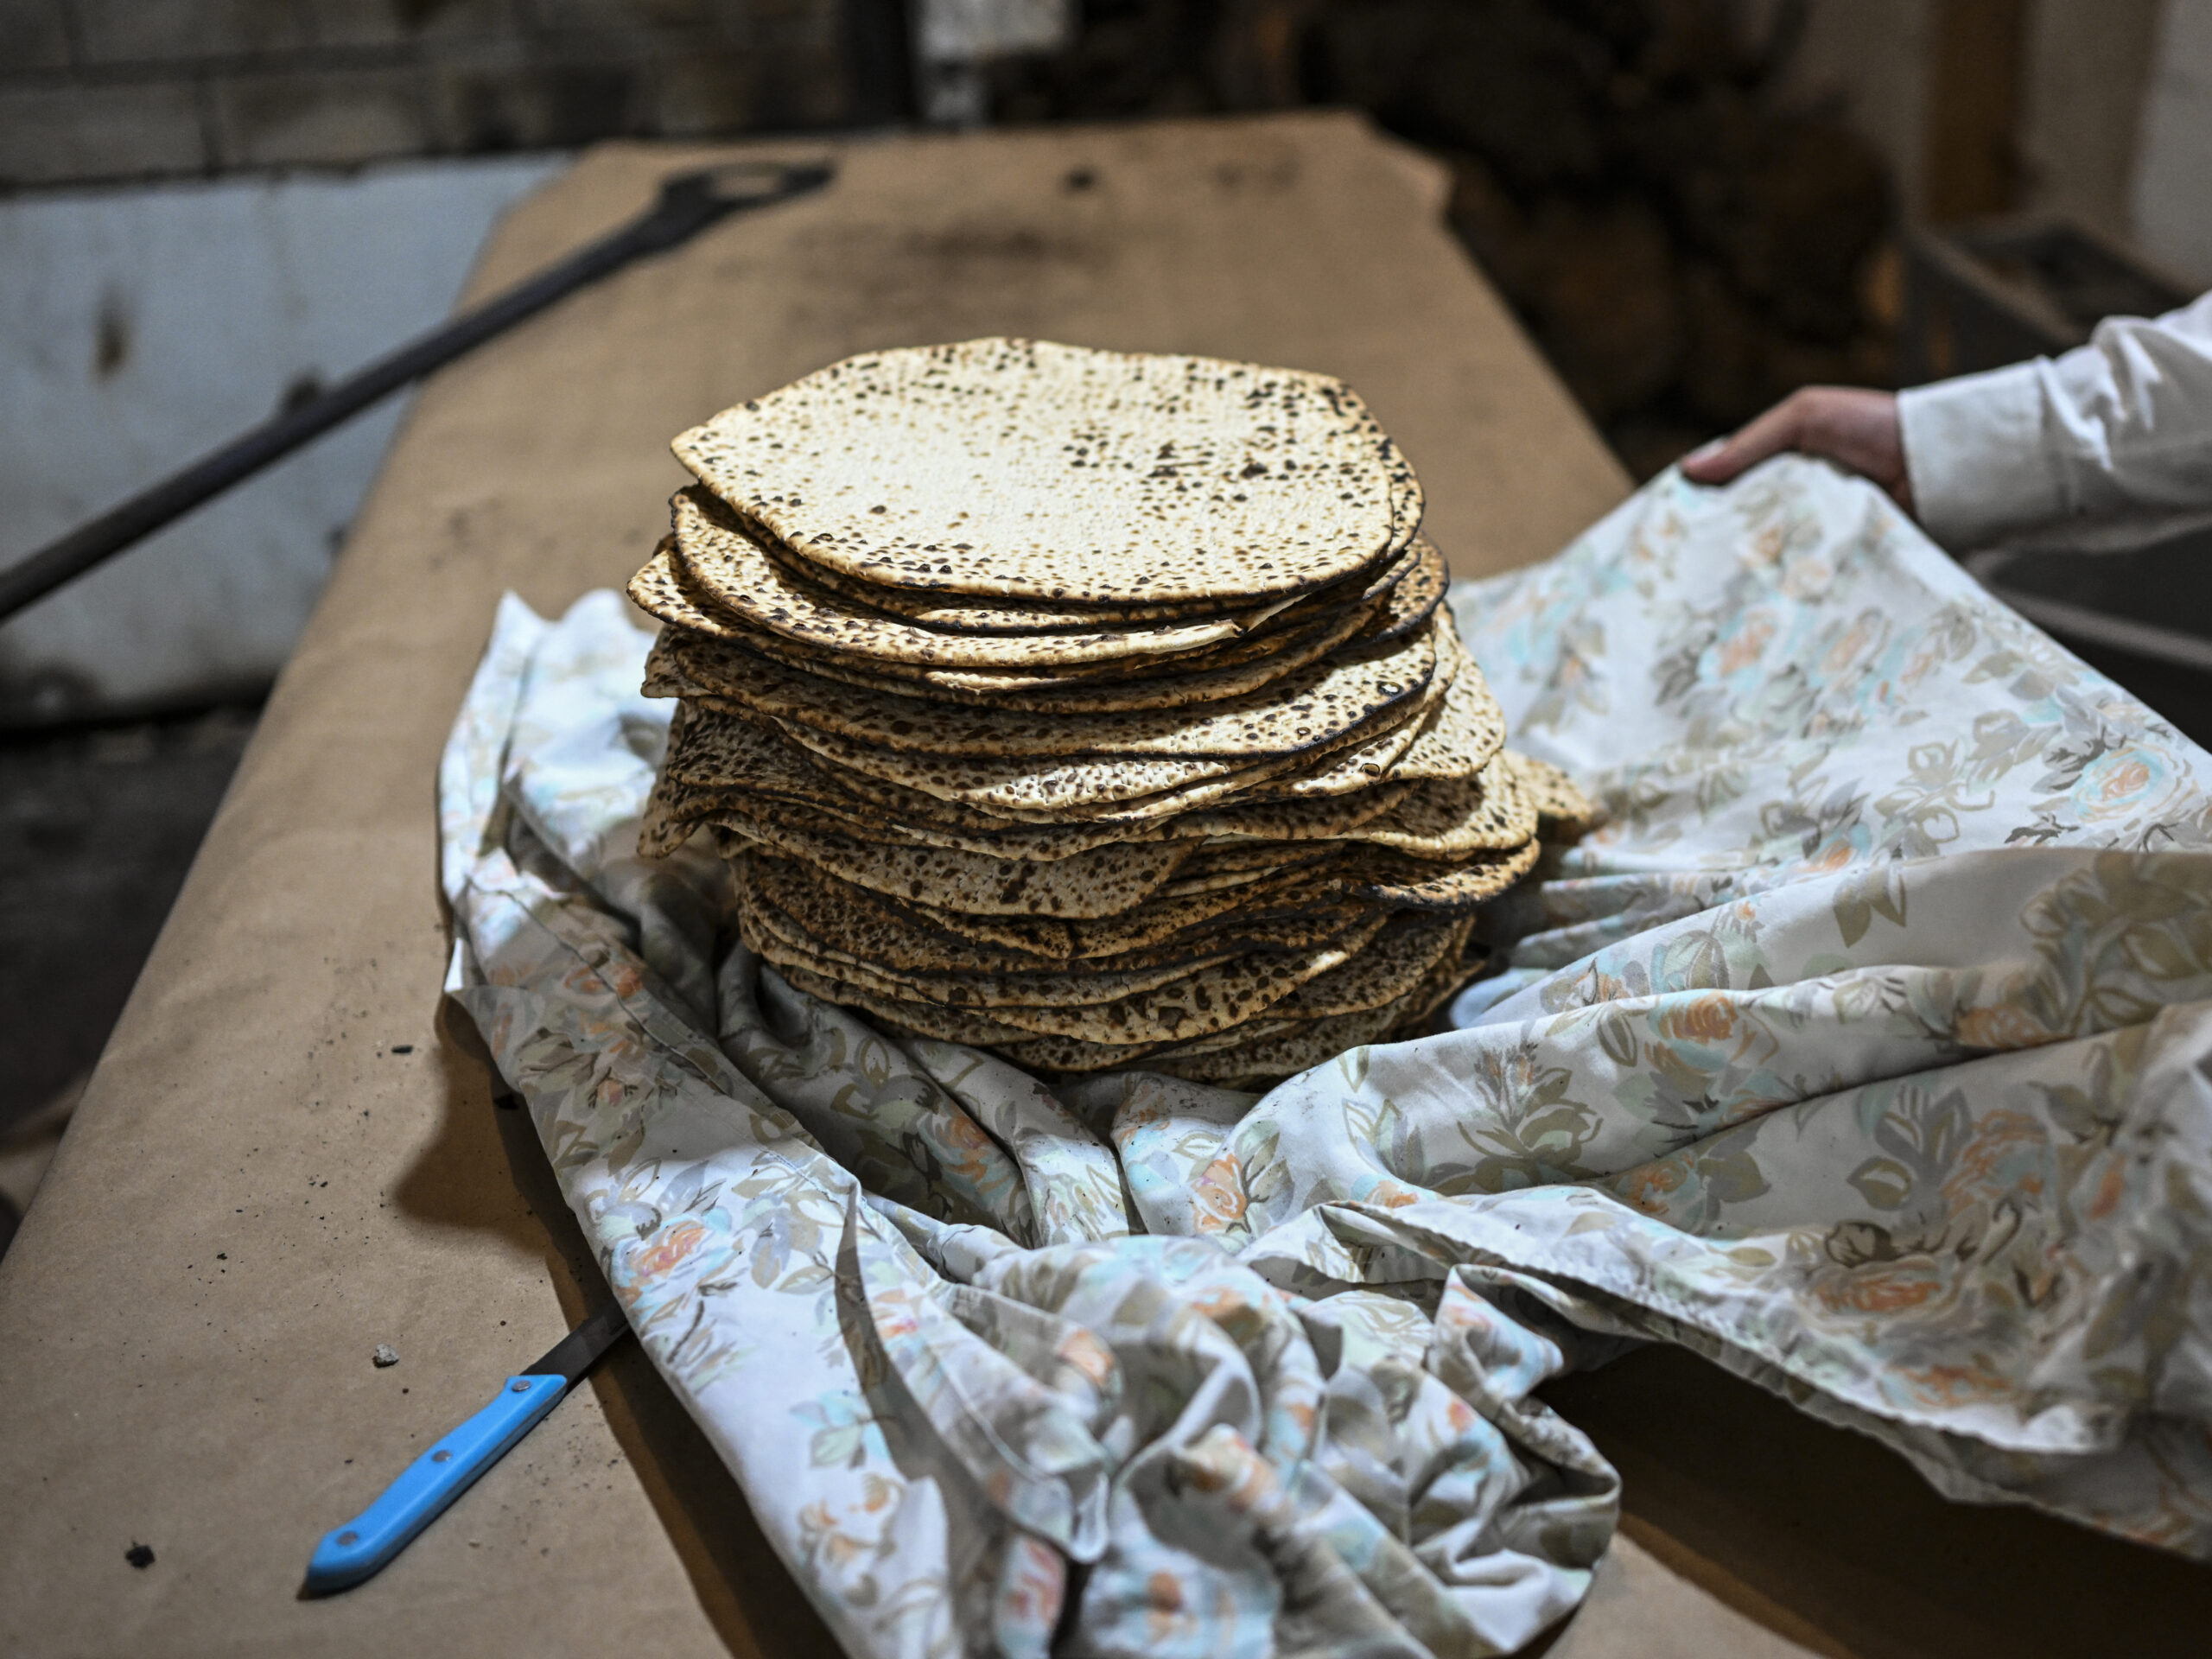 Although matzo sold in supermarkets is typically square, the round matzo is believed to be the earliest form of this unleavened bread that is eaten during the Passover holiday as a symbol of both suffering and freedom.